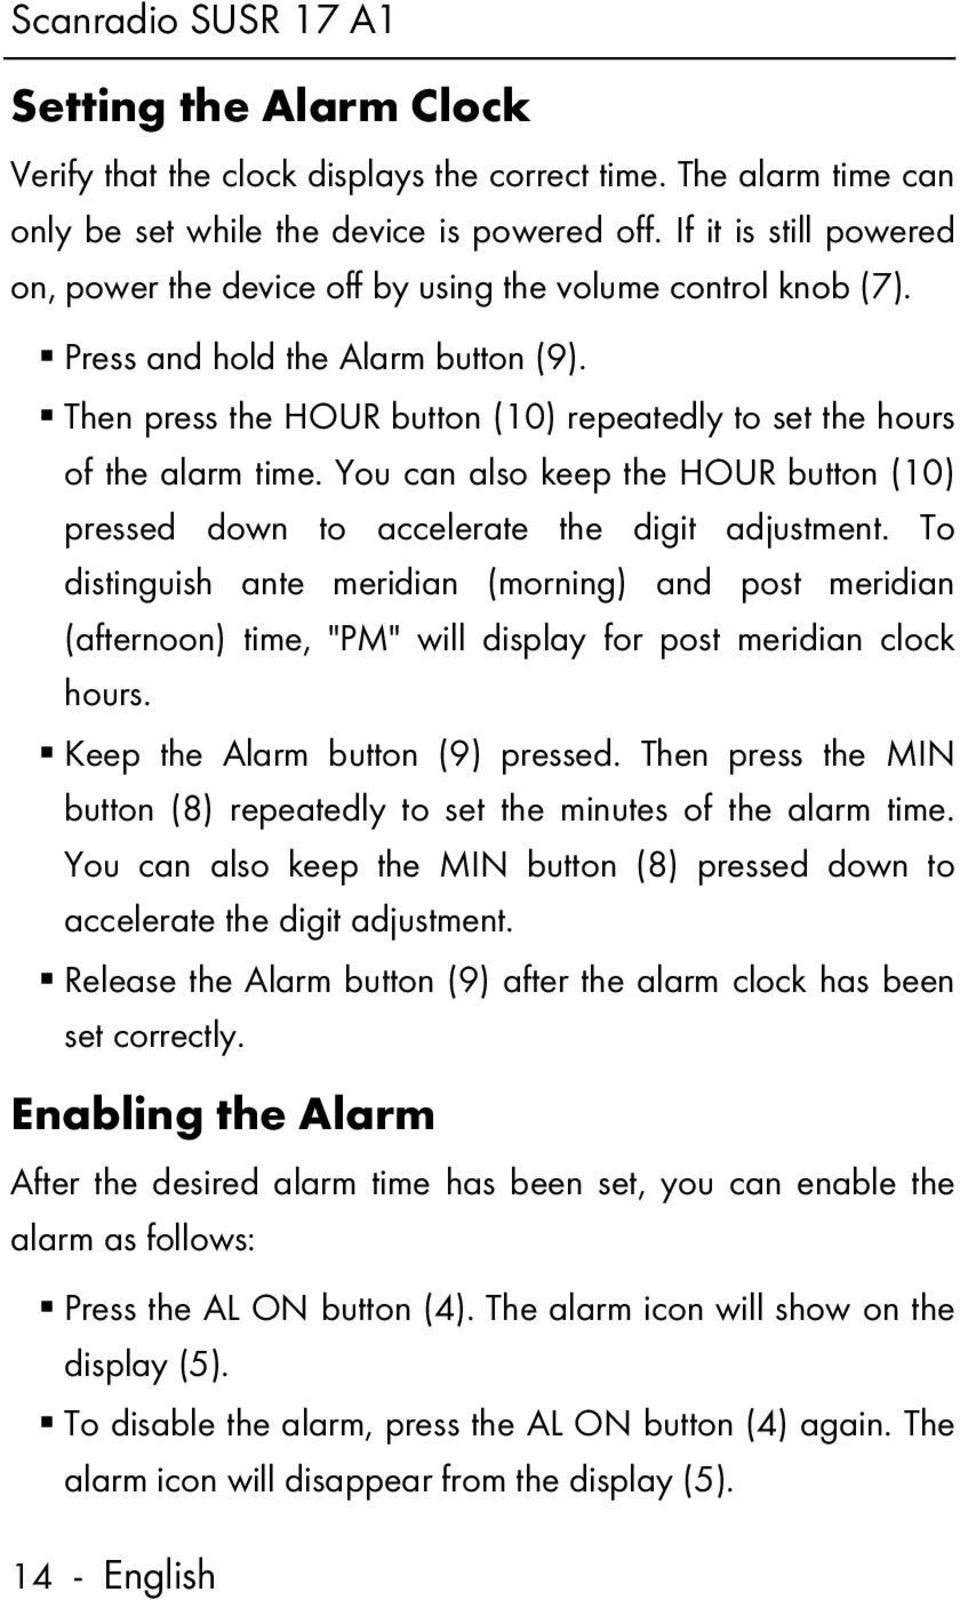 Then press the HOUR button (10) repeatedly to set the hours of the alarm time. You can also keep the HOUR button (10) pressed down to accelerate the digit adjustment.